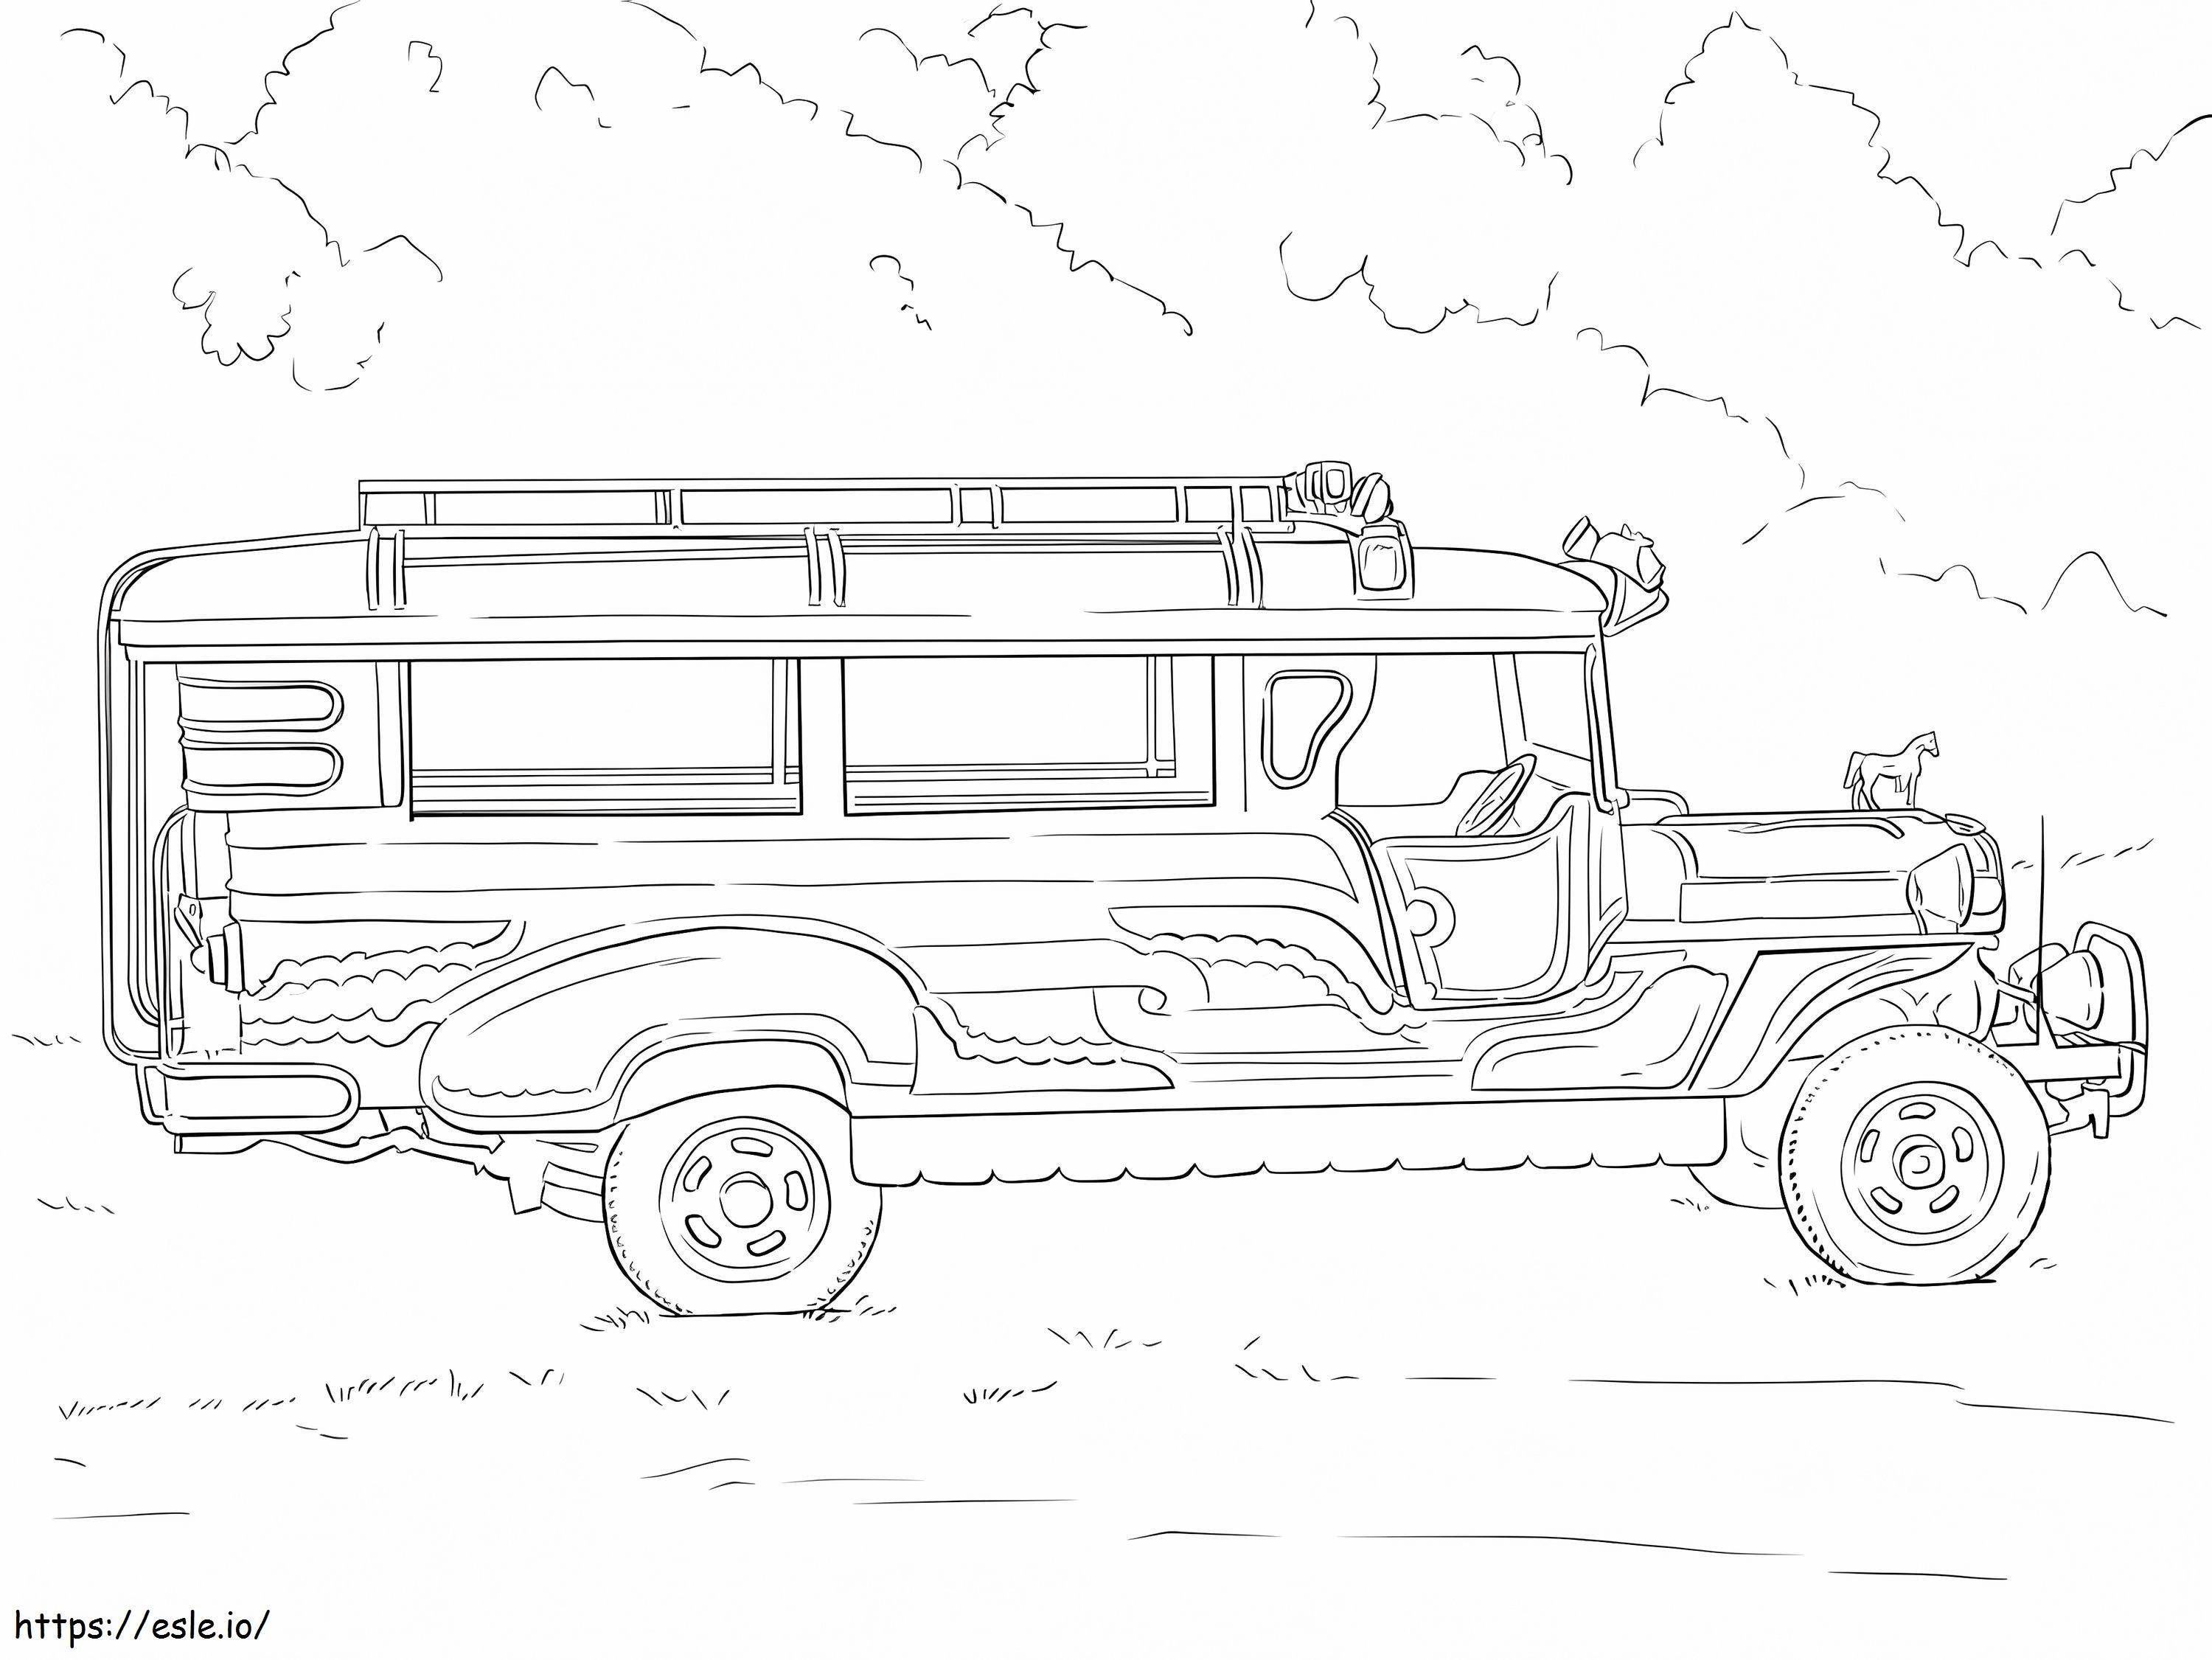 Philippine Jeepney coloring page